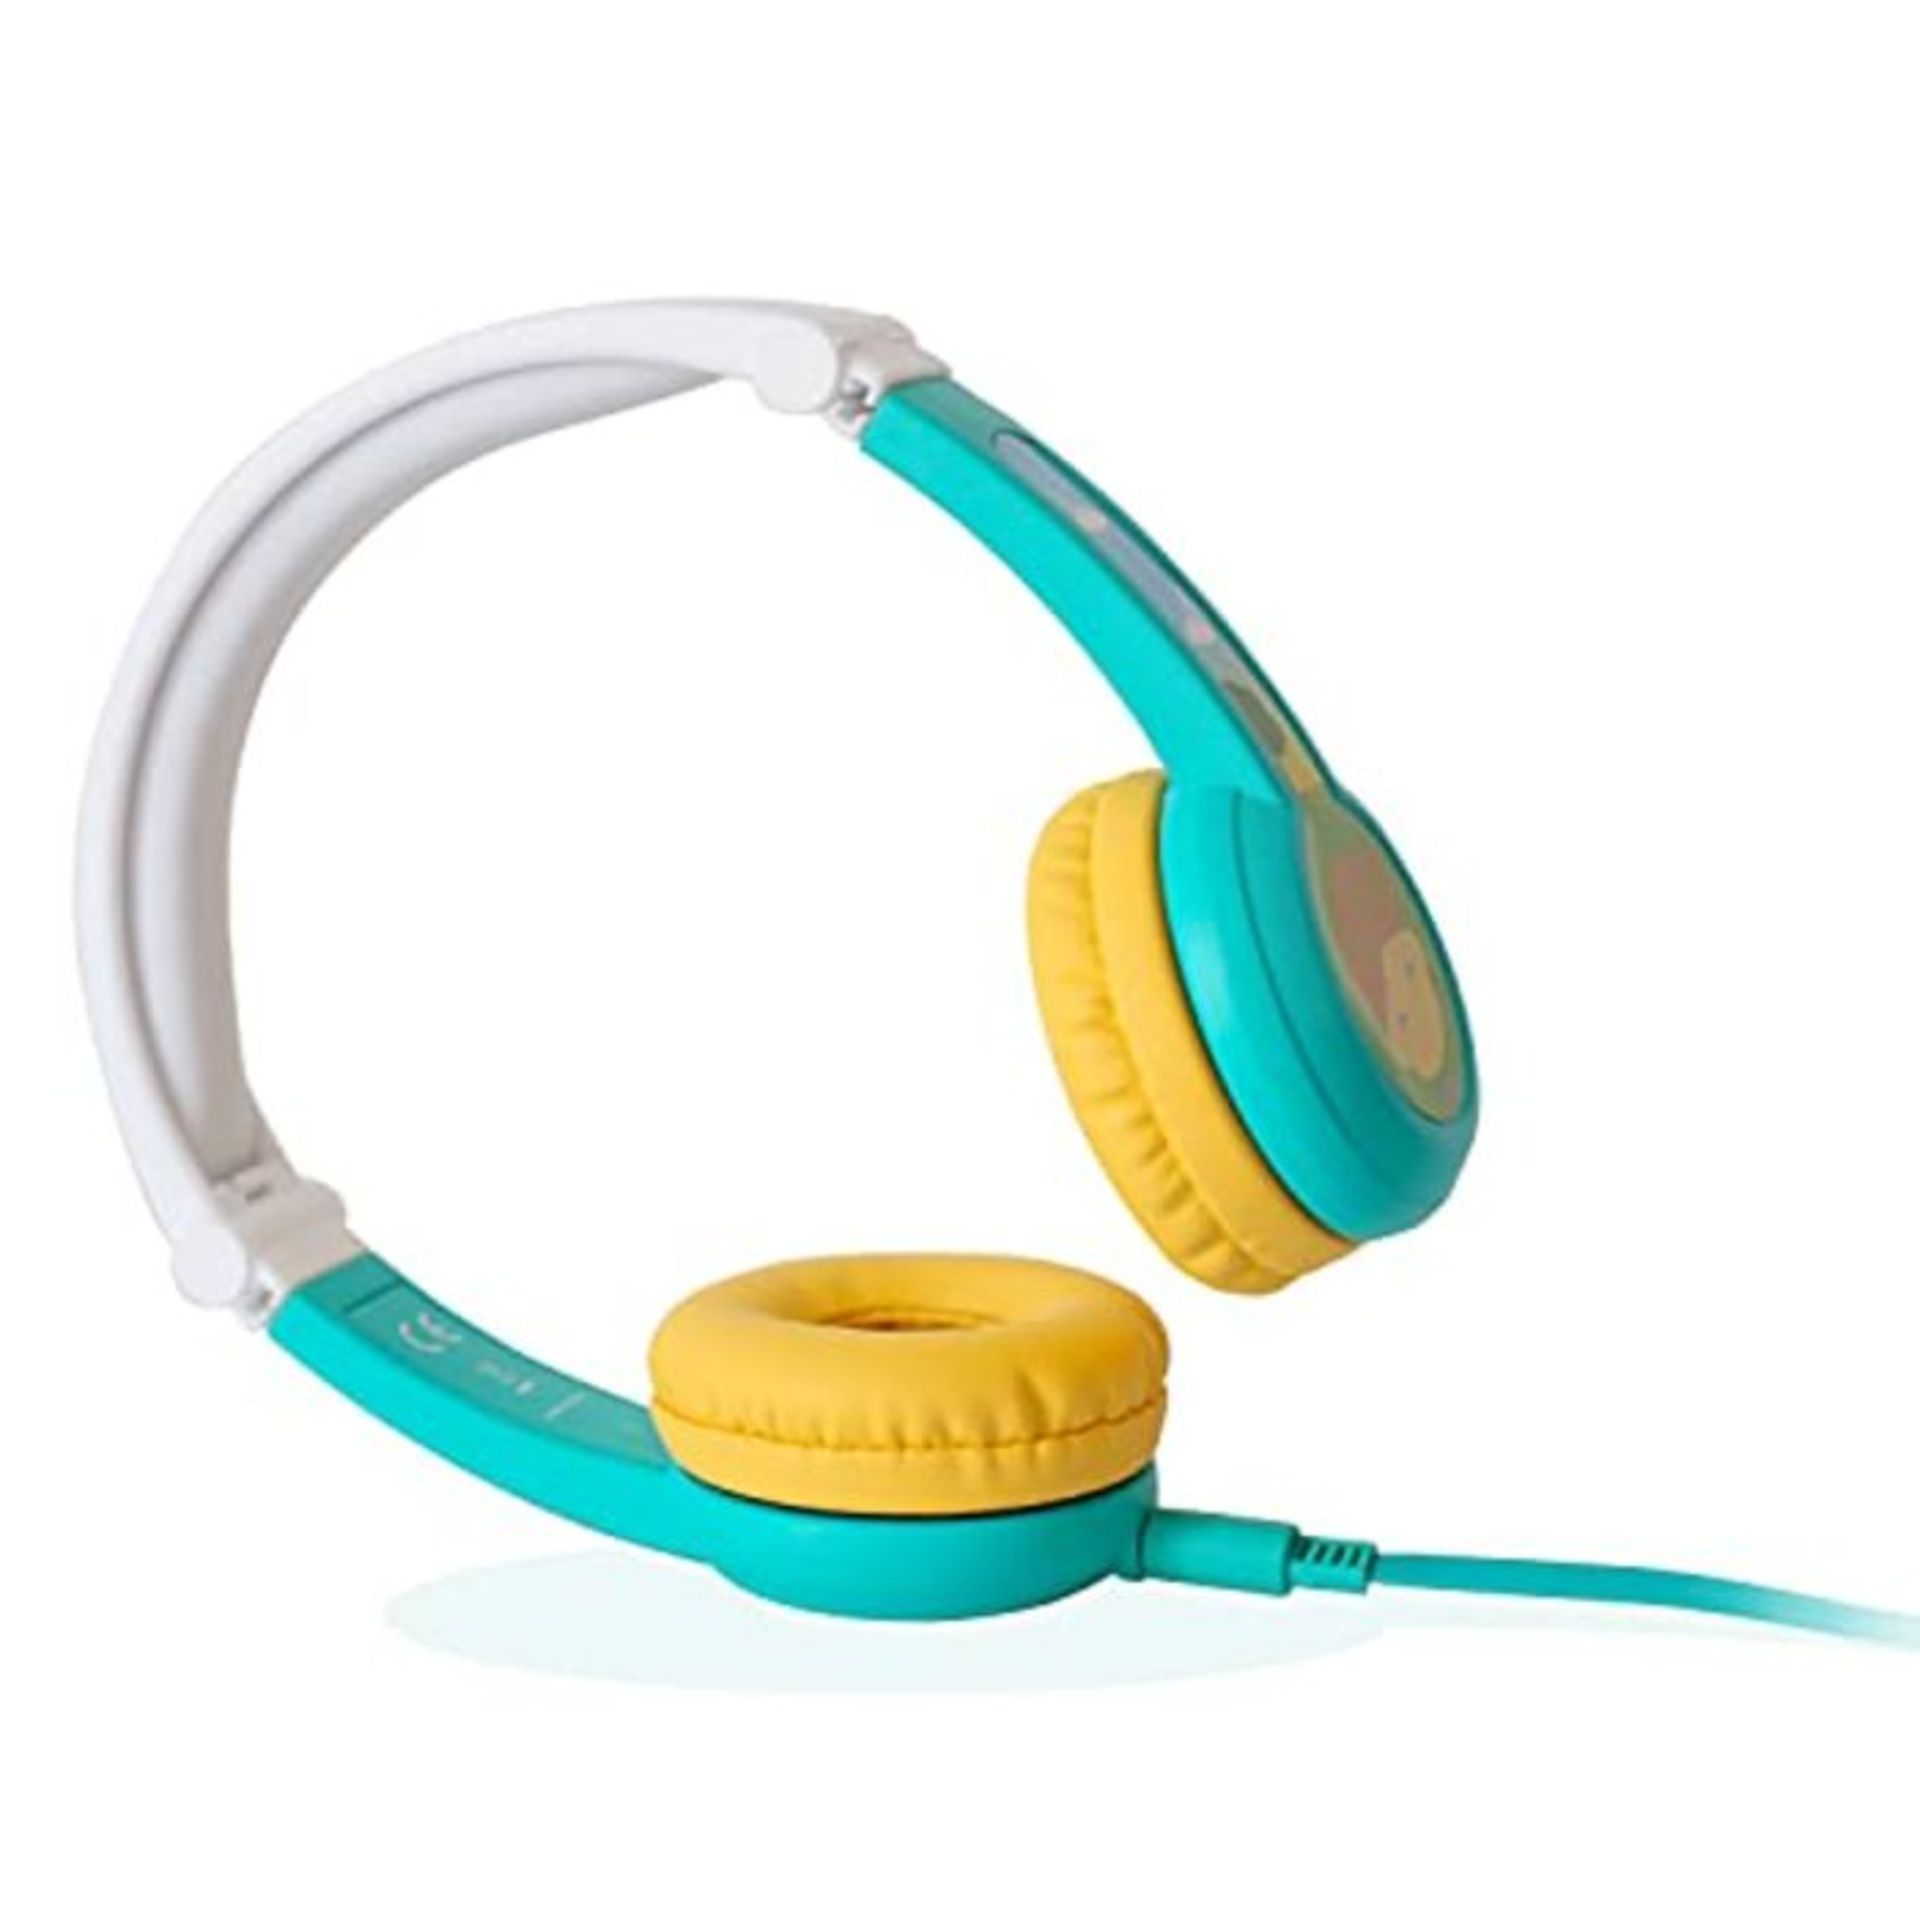 LUNII - Octave children's headphones - Compatible with My Fabulous Storyteller - 3 to